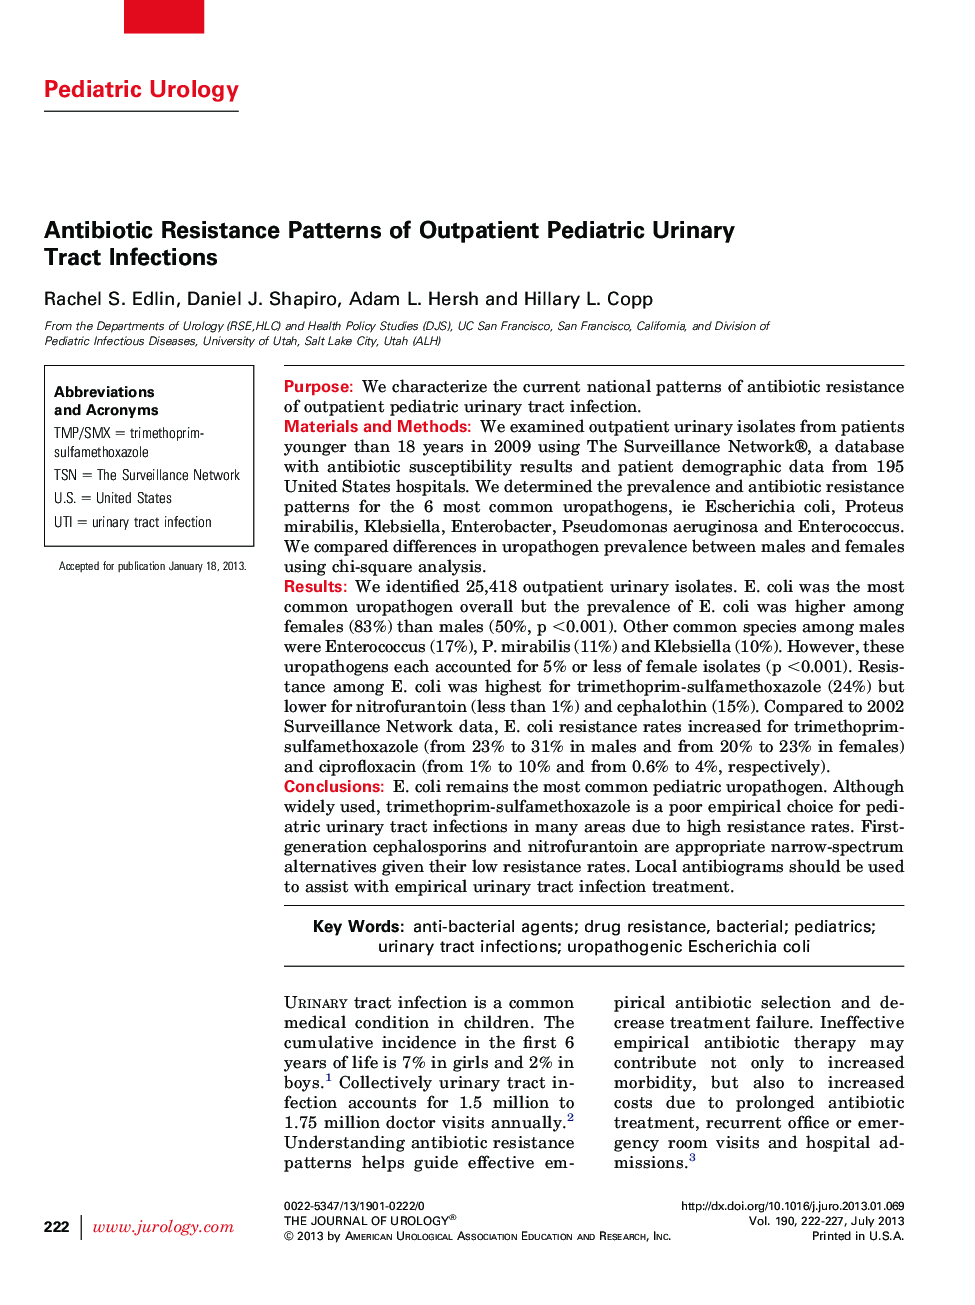 Antibiotic Resistance Patterns of Outpatient Pediatric Urinary Tract Infections